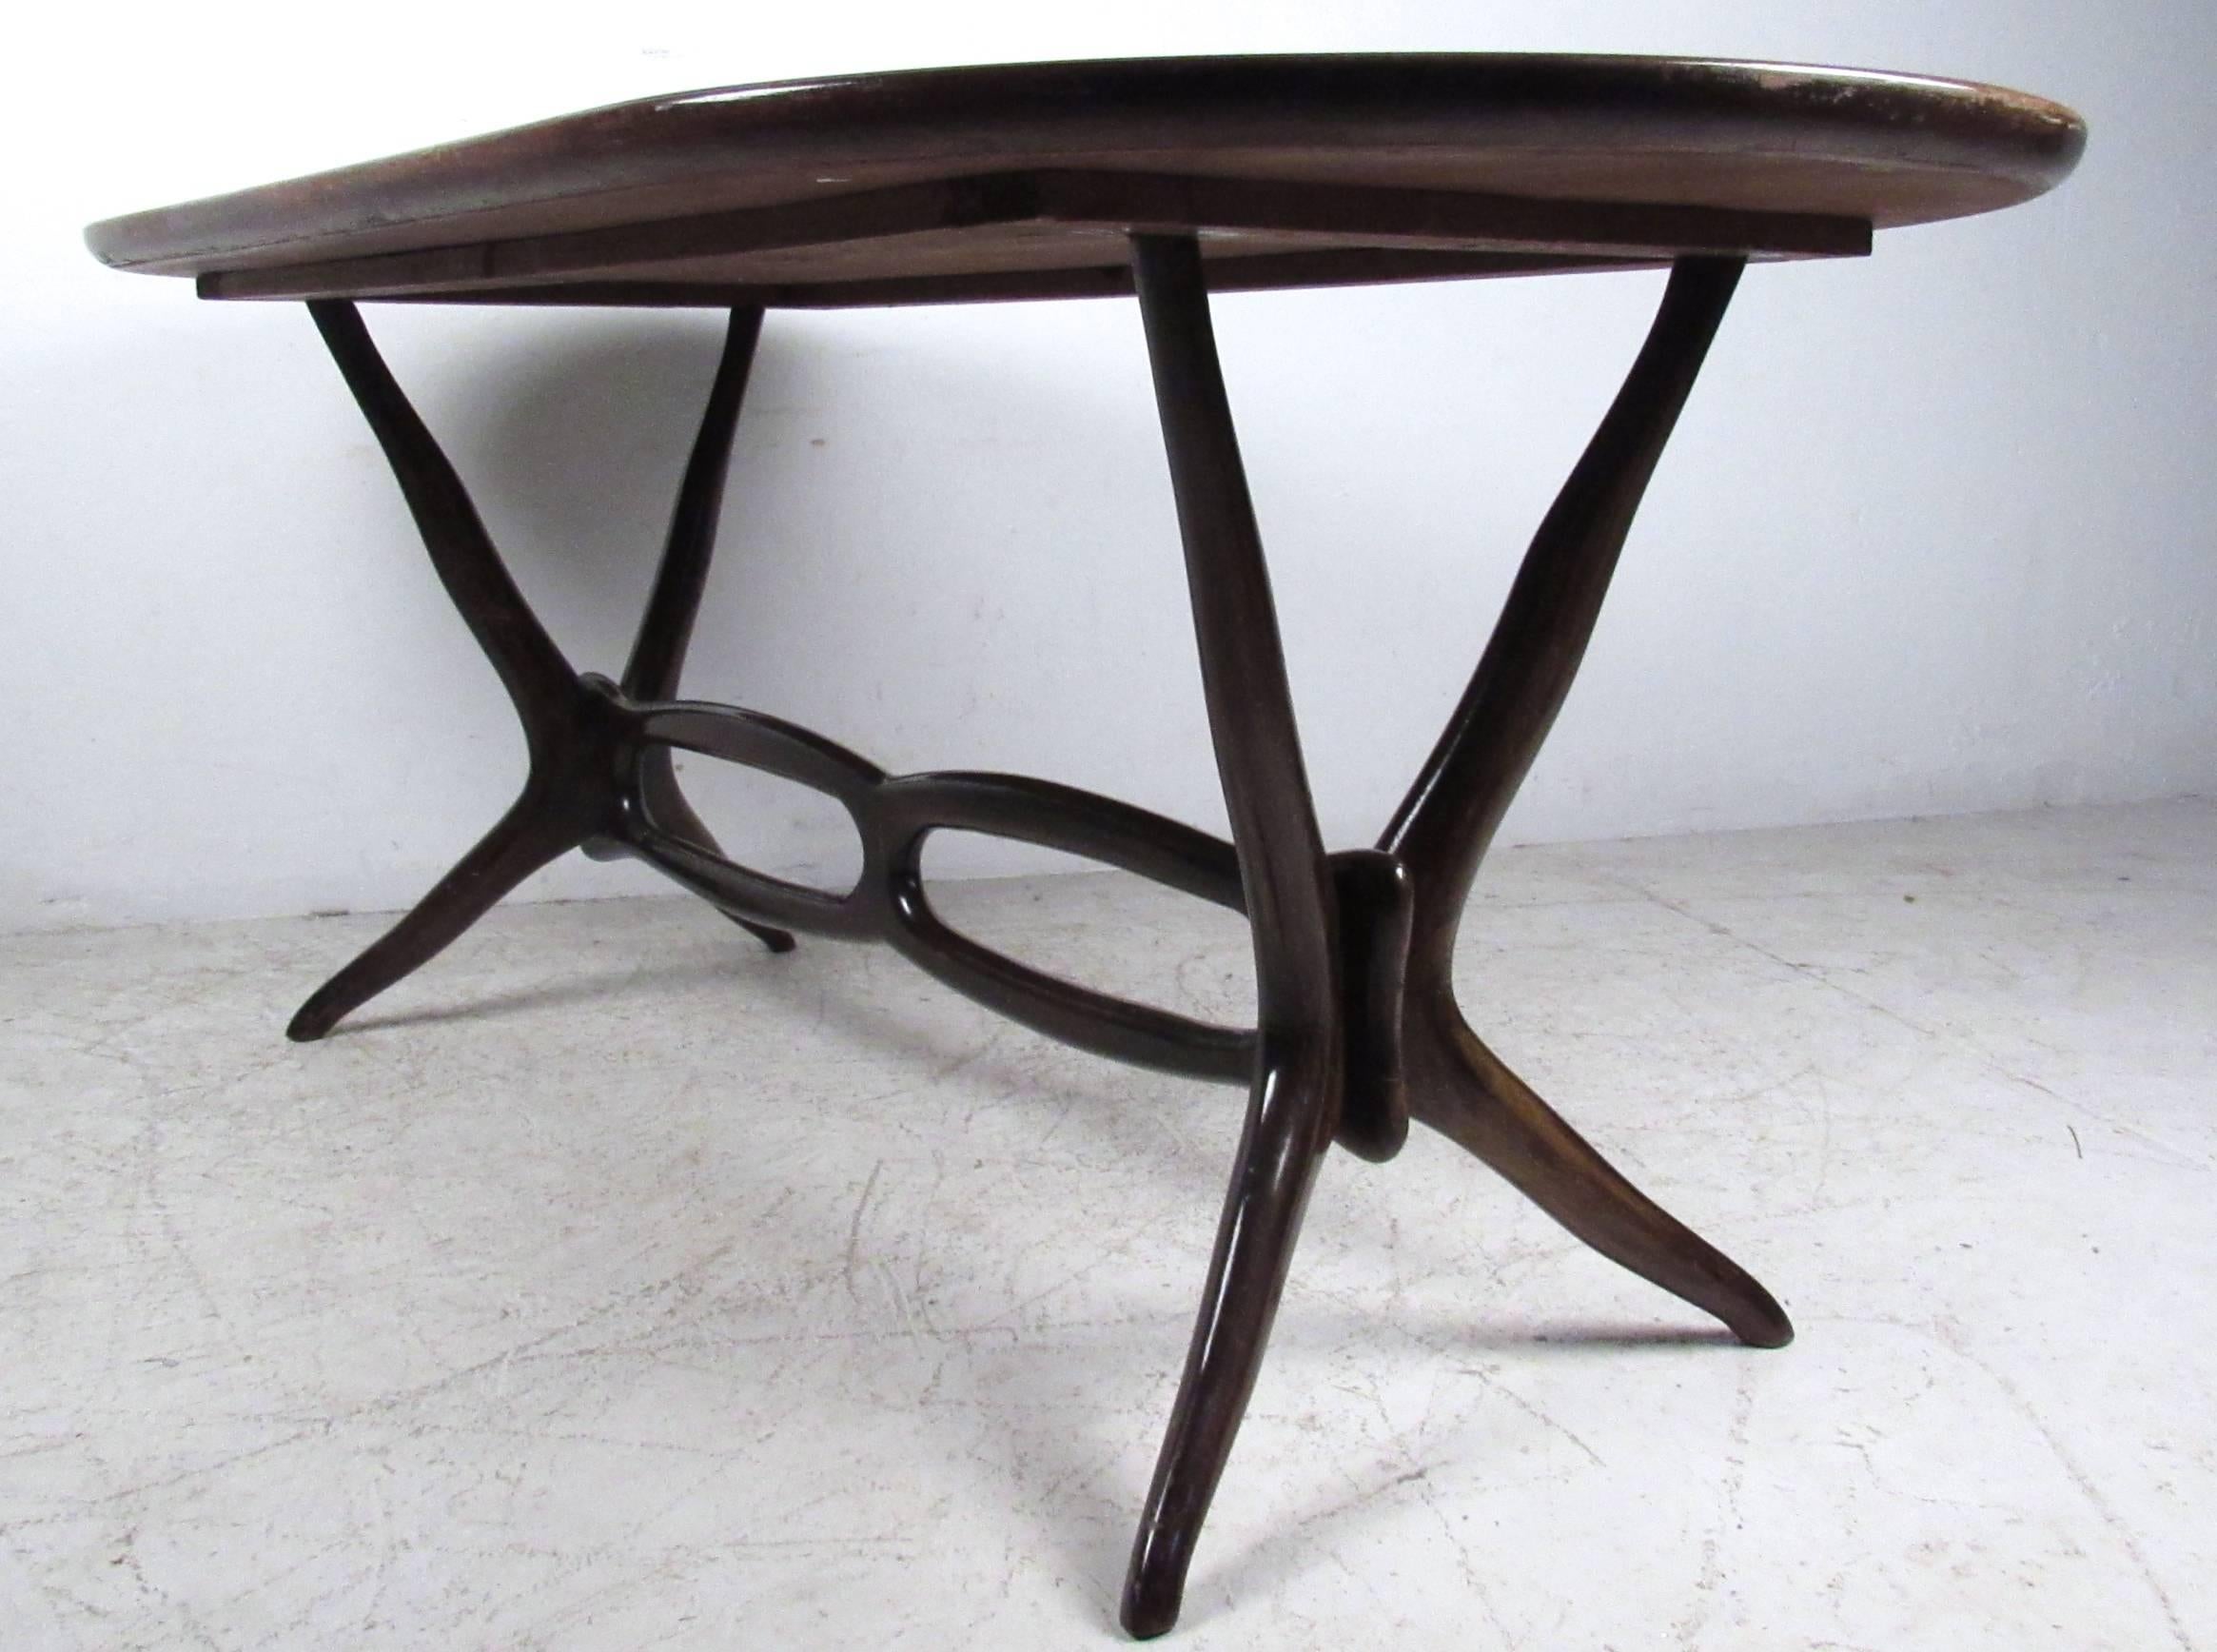 This unique dining table features unique vintage lucite top, sculptural stretcher and tapered legs. Elegant yet inviting this impressive Mid-Century table is well suited to a multitude of settings, please confirm item location (NY or NJ).